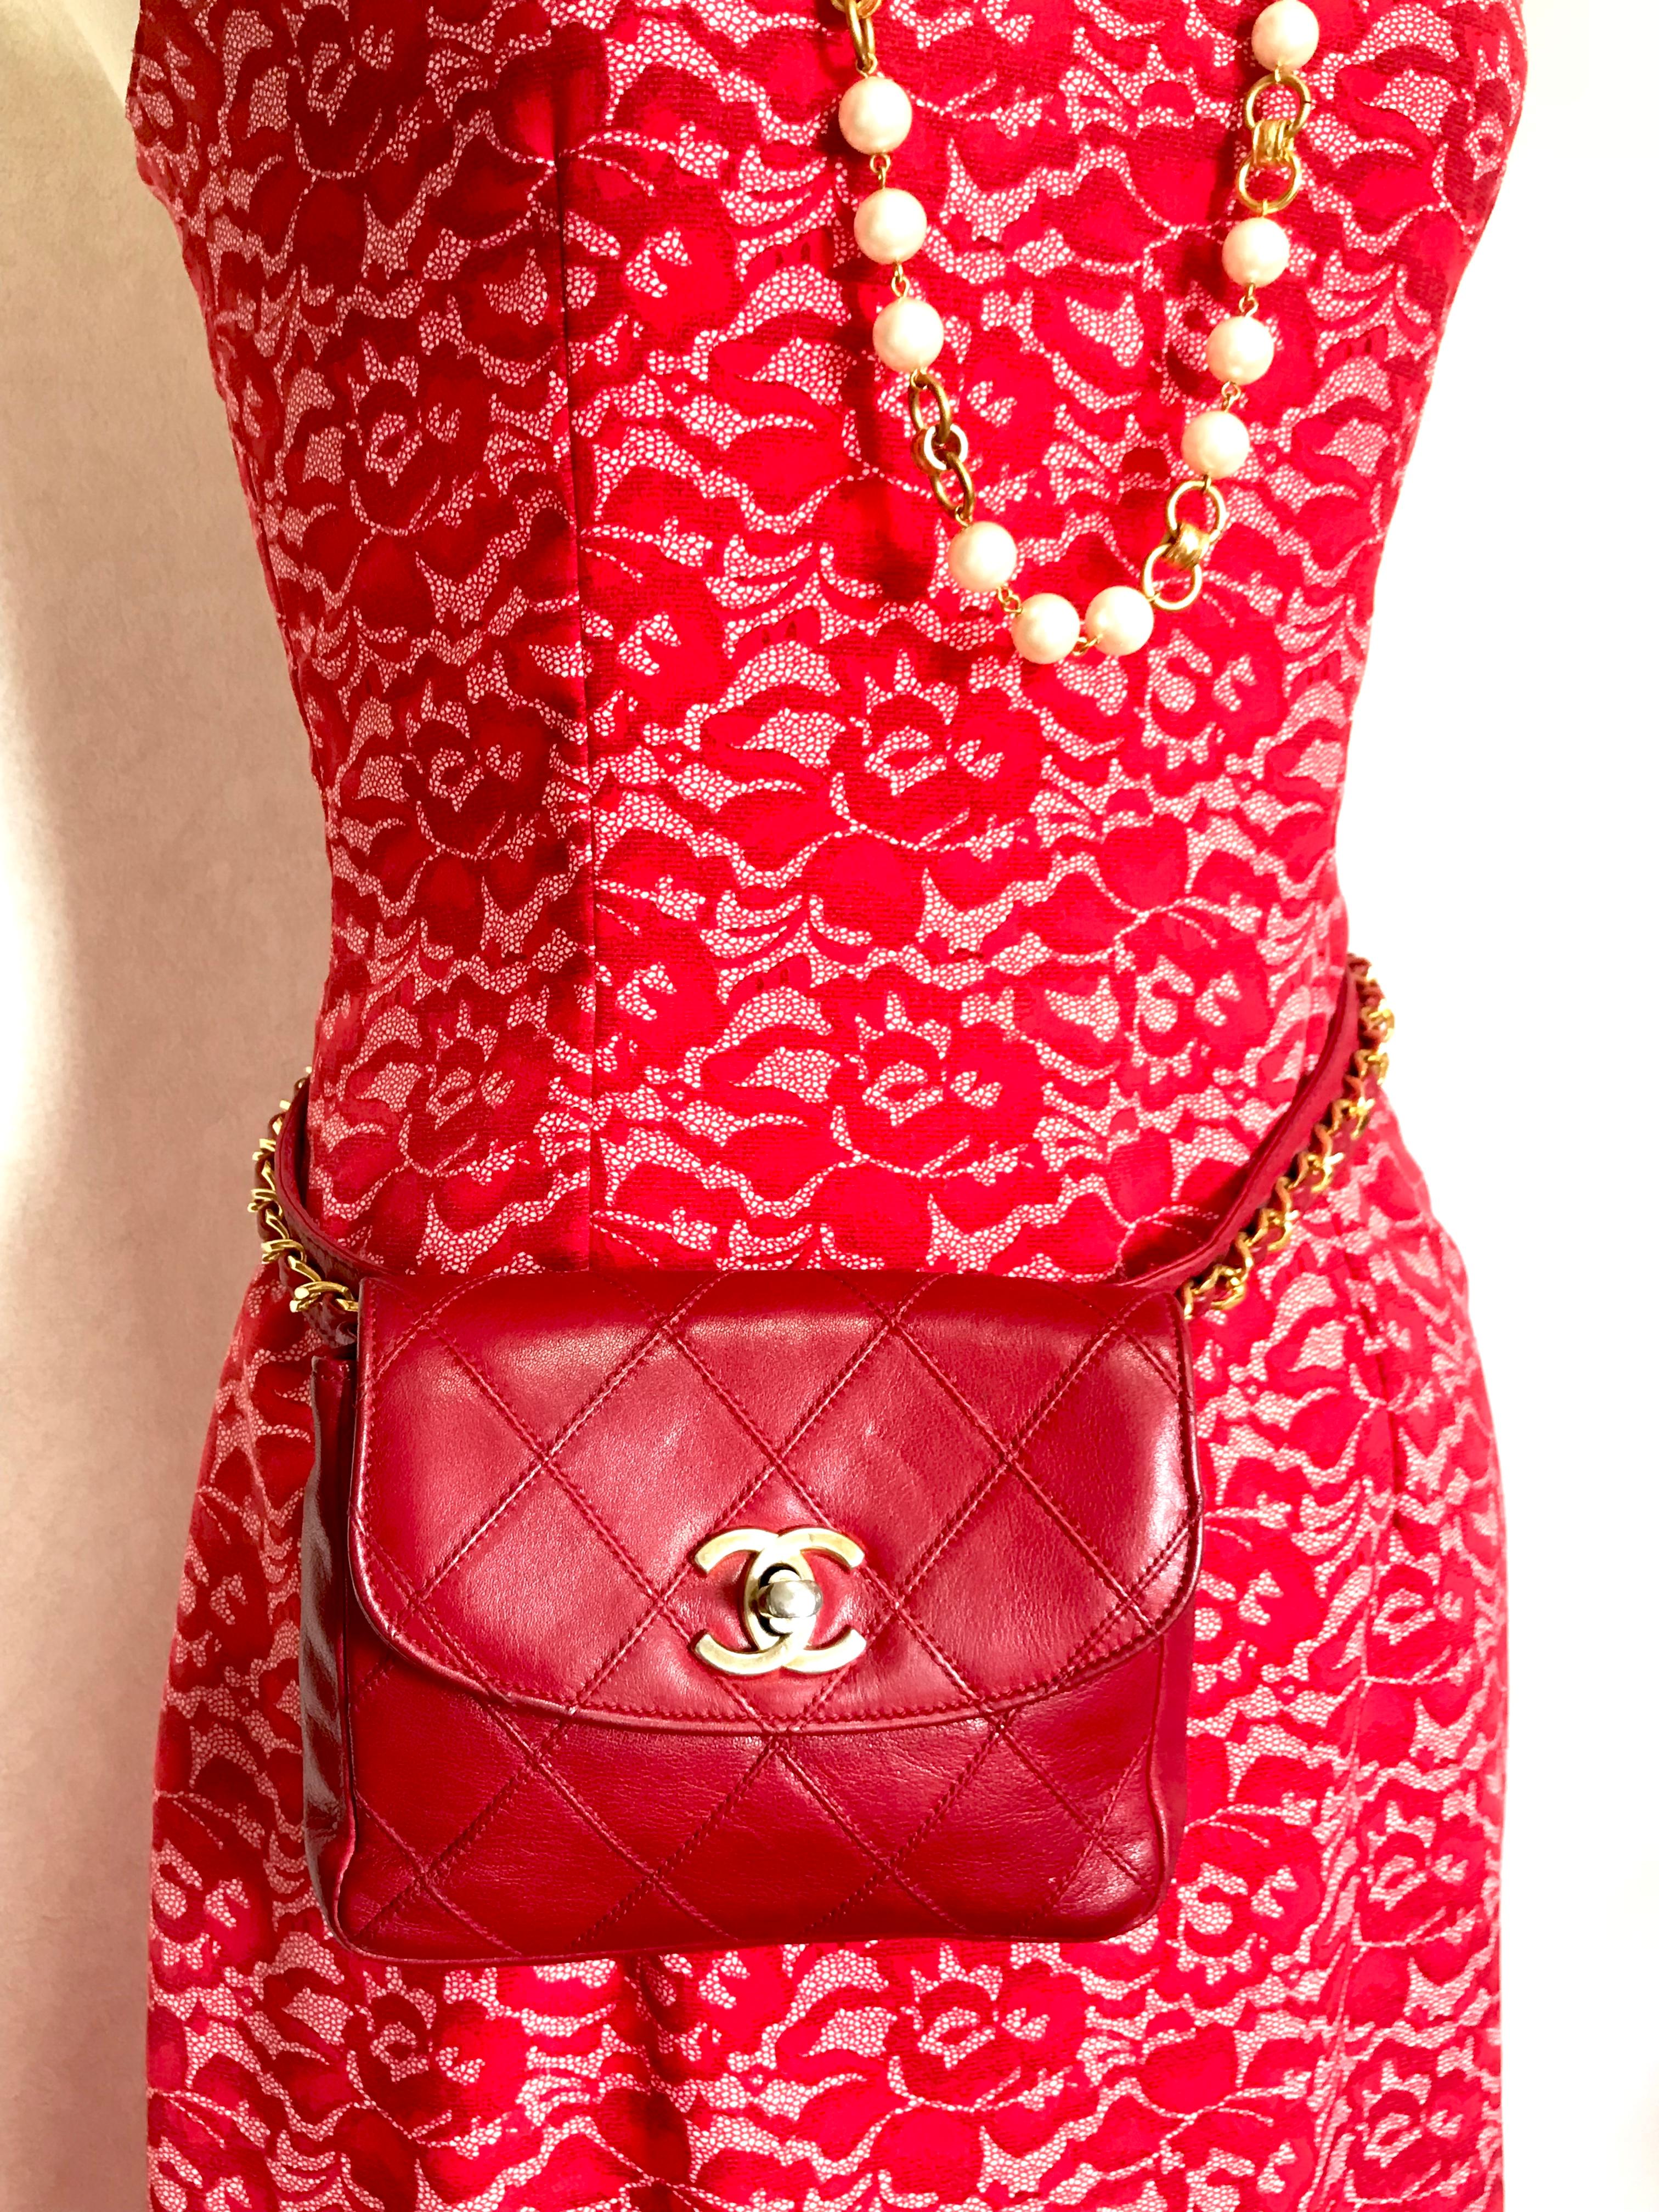 1990s. Vintage CHANEL lipstick red leather waist/belt bag, fanny pack with detachable chain belt and cc closure. Belt size would fit 24.8